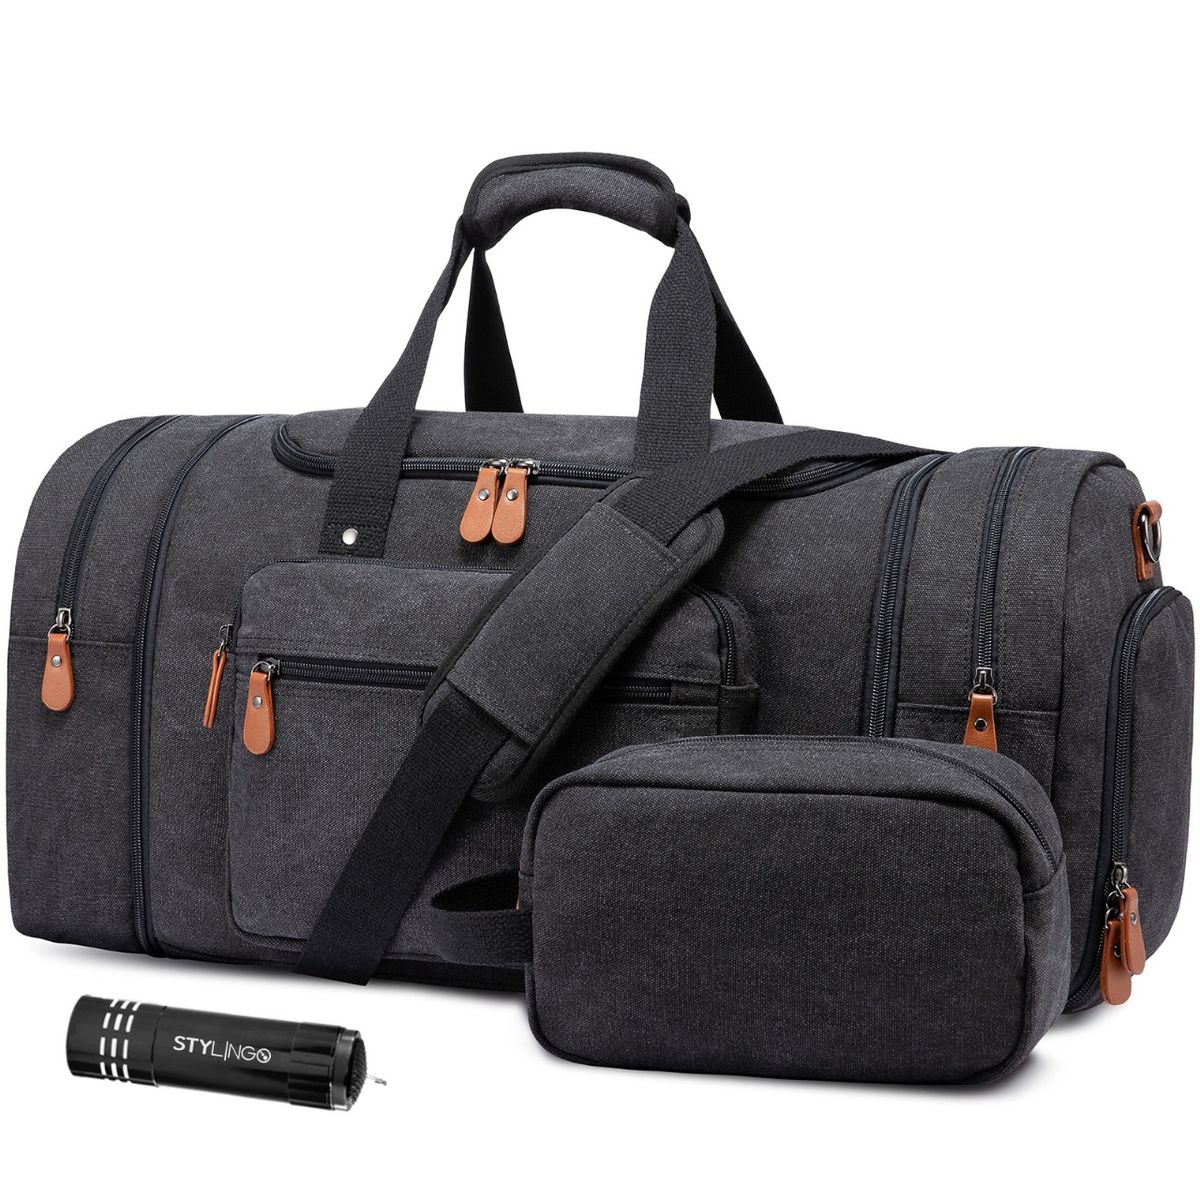 Travel Bag - Overnight Duffel Bag with Toiletry Bag and Stylingo Torch ...